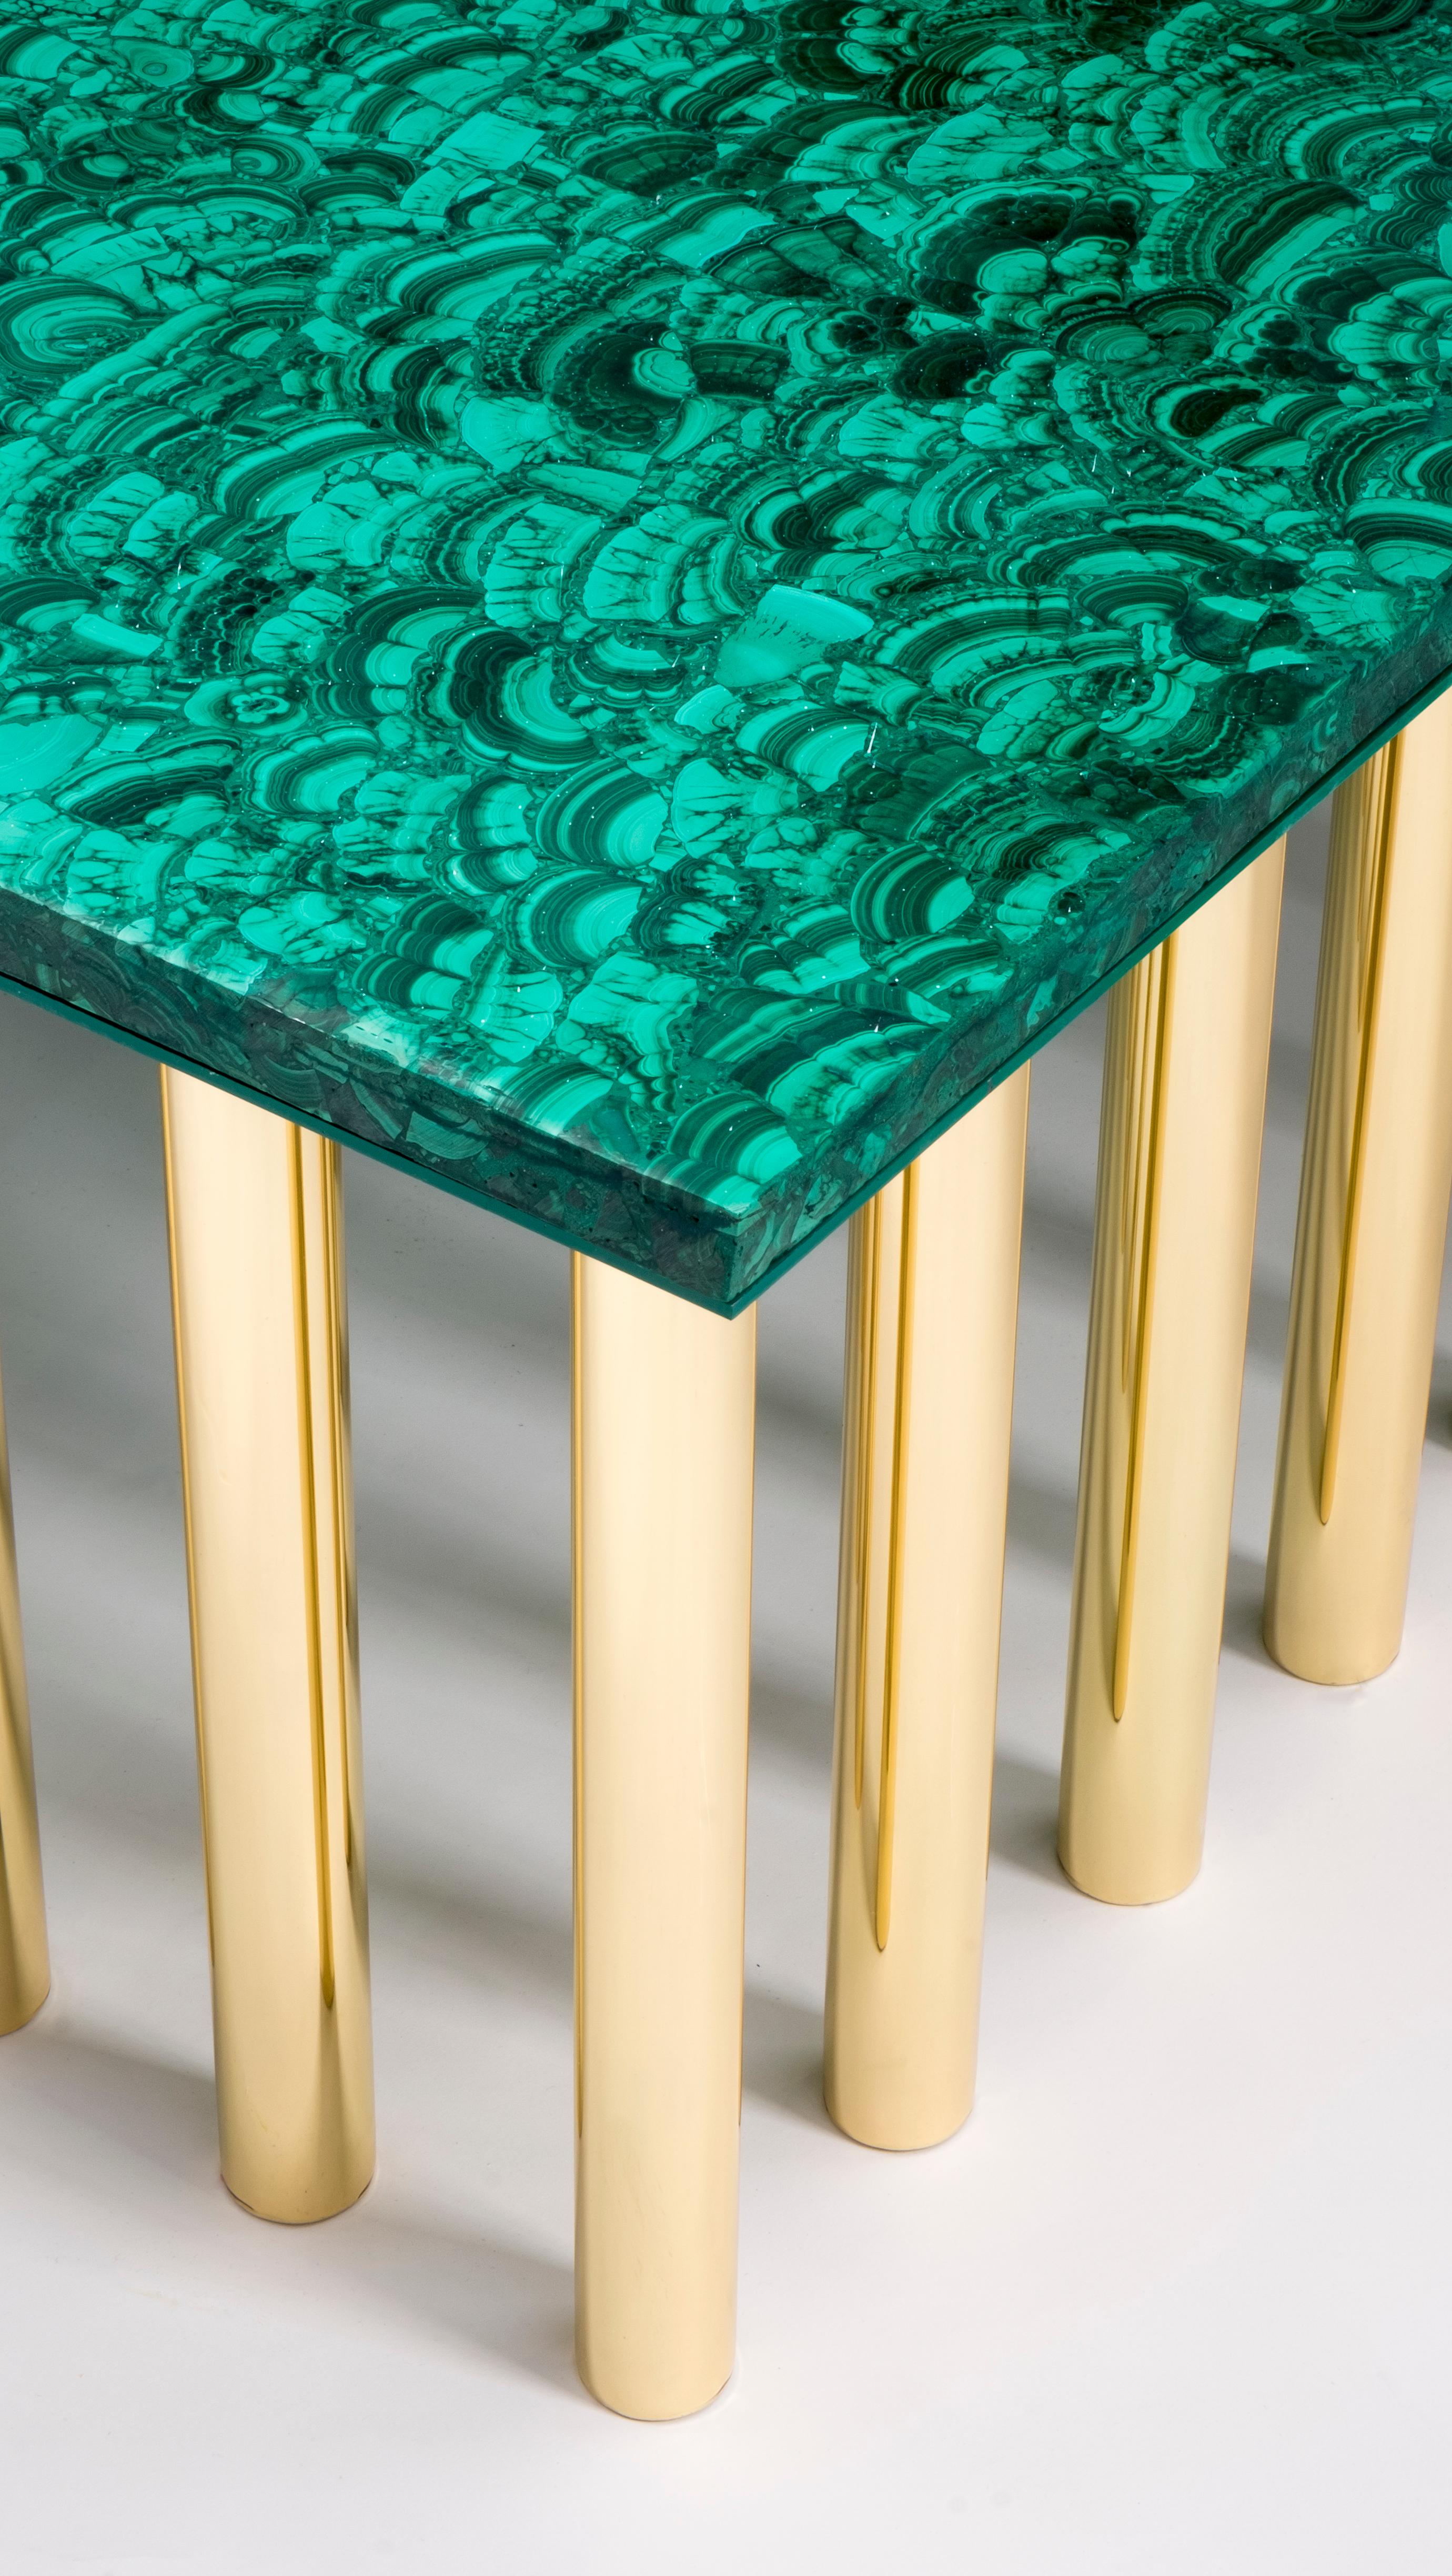 Stalactite model coffee table, 32 polished brass legs, rectangular malachite tabletop designed by Studio Superego for Superego Editions.

Biography:
Superego editions was born in 2006, performing a constant activity of research in decorative arts by